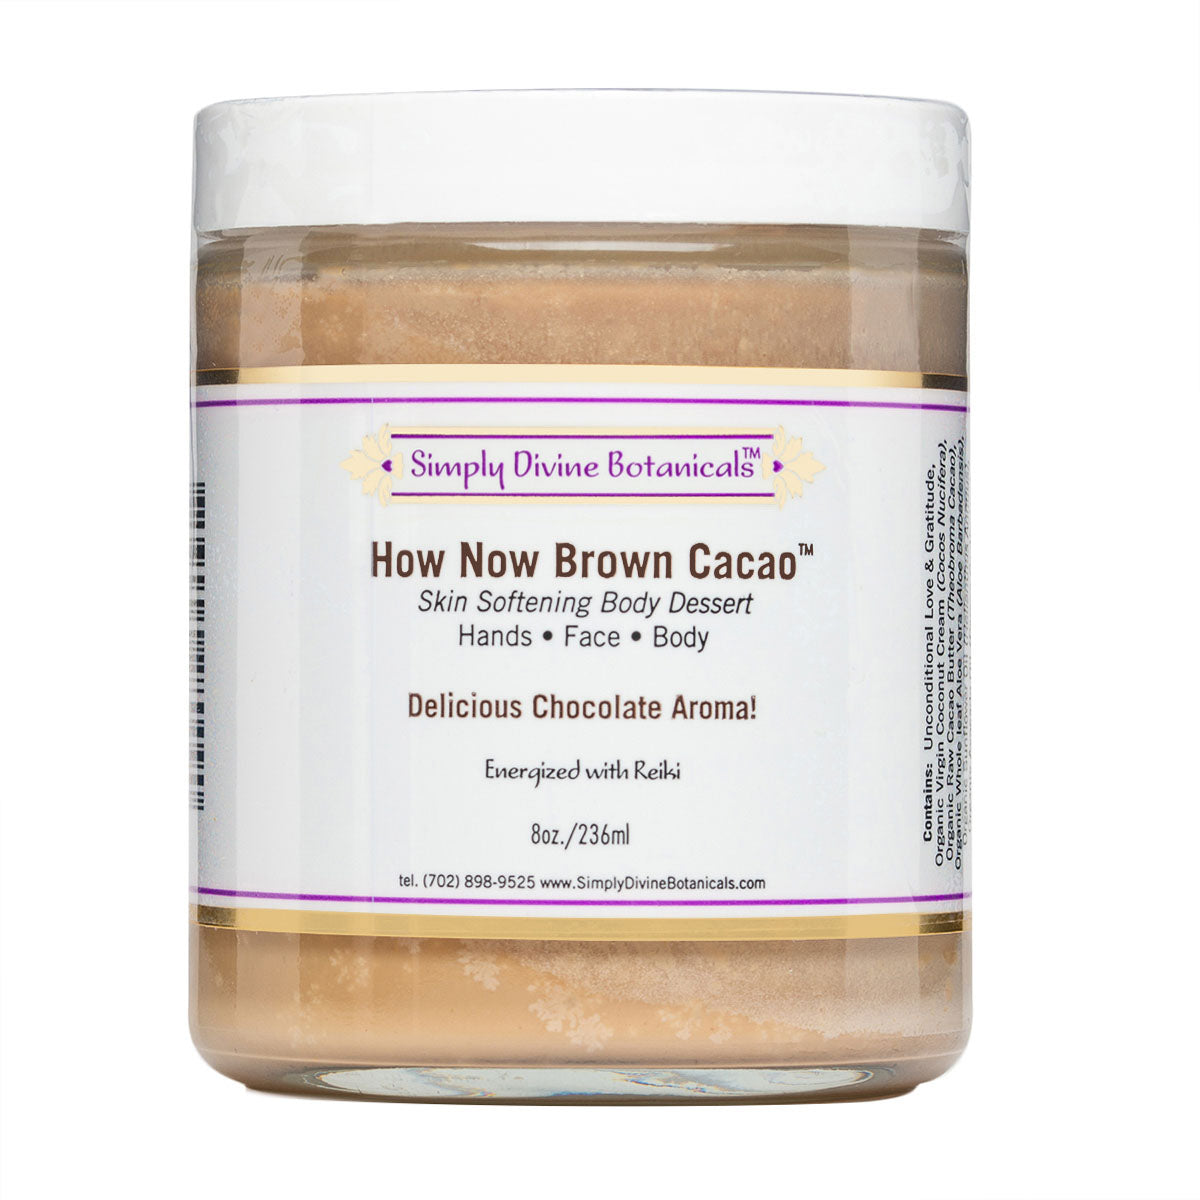 How Now Brown Cacao | Simply Divine Botanicals | Raw Living UK | Skin Care &amp; Beauty | Simply Divine Botanicals How Now Brown Cacao Skin Softening Body Dessert: a Luxurious Body Moisturiser; a Treat for the Skin, with Delicious Chocolate Aroma!